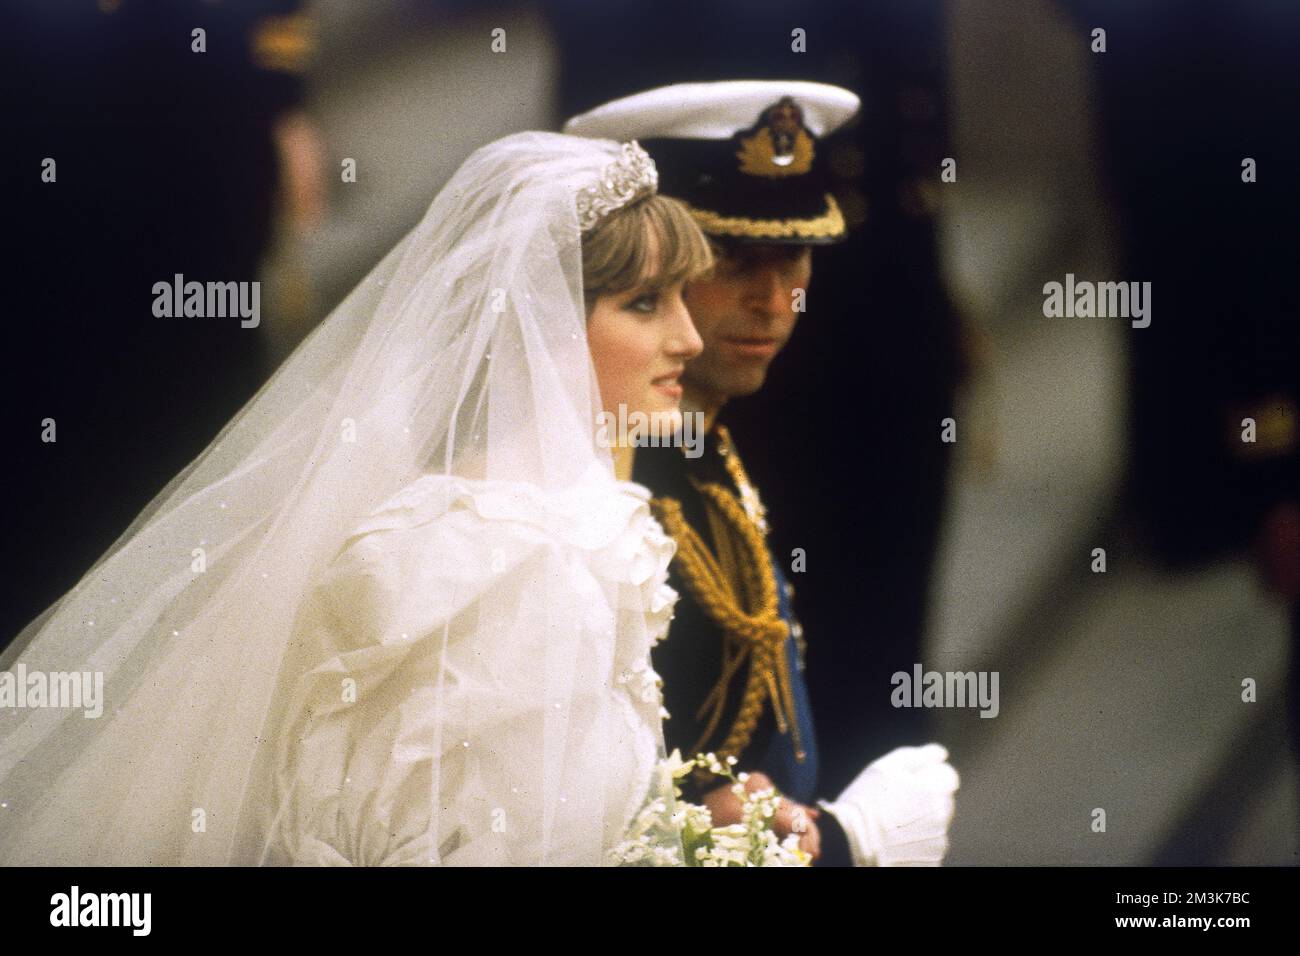 A photograph of Prince Charles with his bride, Lady Diana Spencer, later Princess of Wales. Crowds of 60000 people lined the streets of London to watch the ceremony on the 29th July 1981.     Date: 29th July 1981 Stock Photo